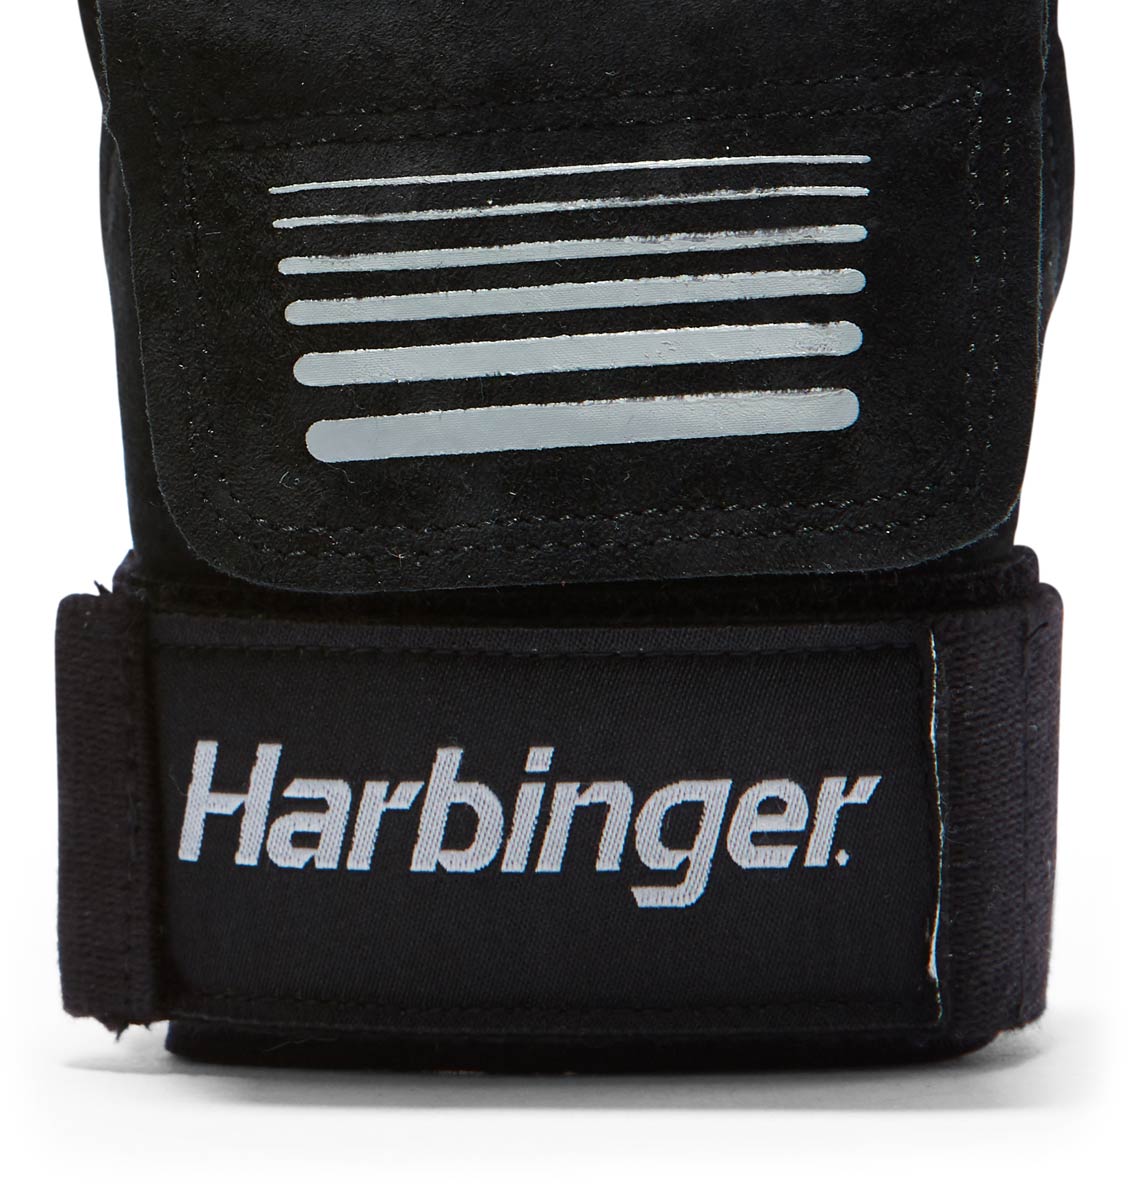 20220 20230 20240 Harbinger 2 in 1 Lifting Grips Wrist Support Close Up